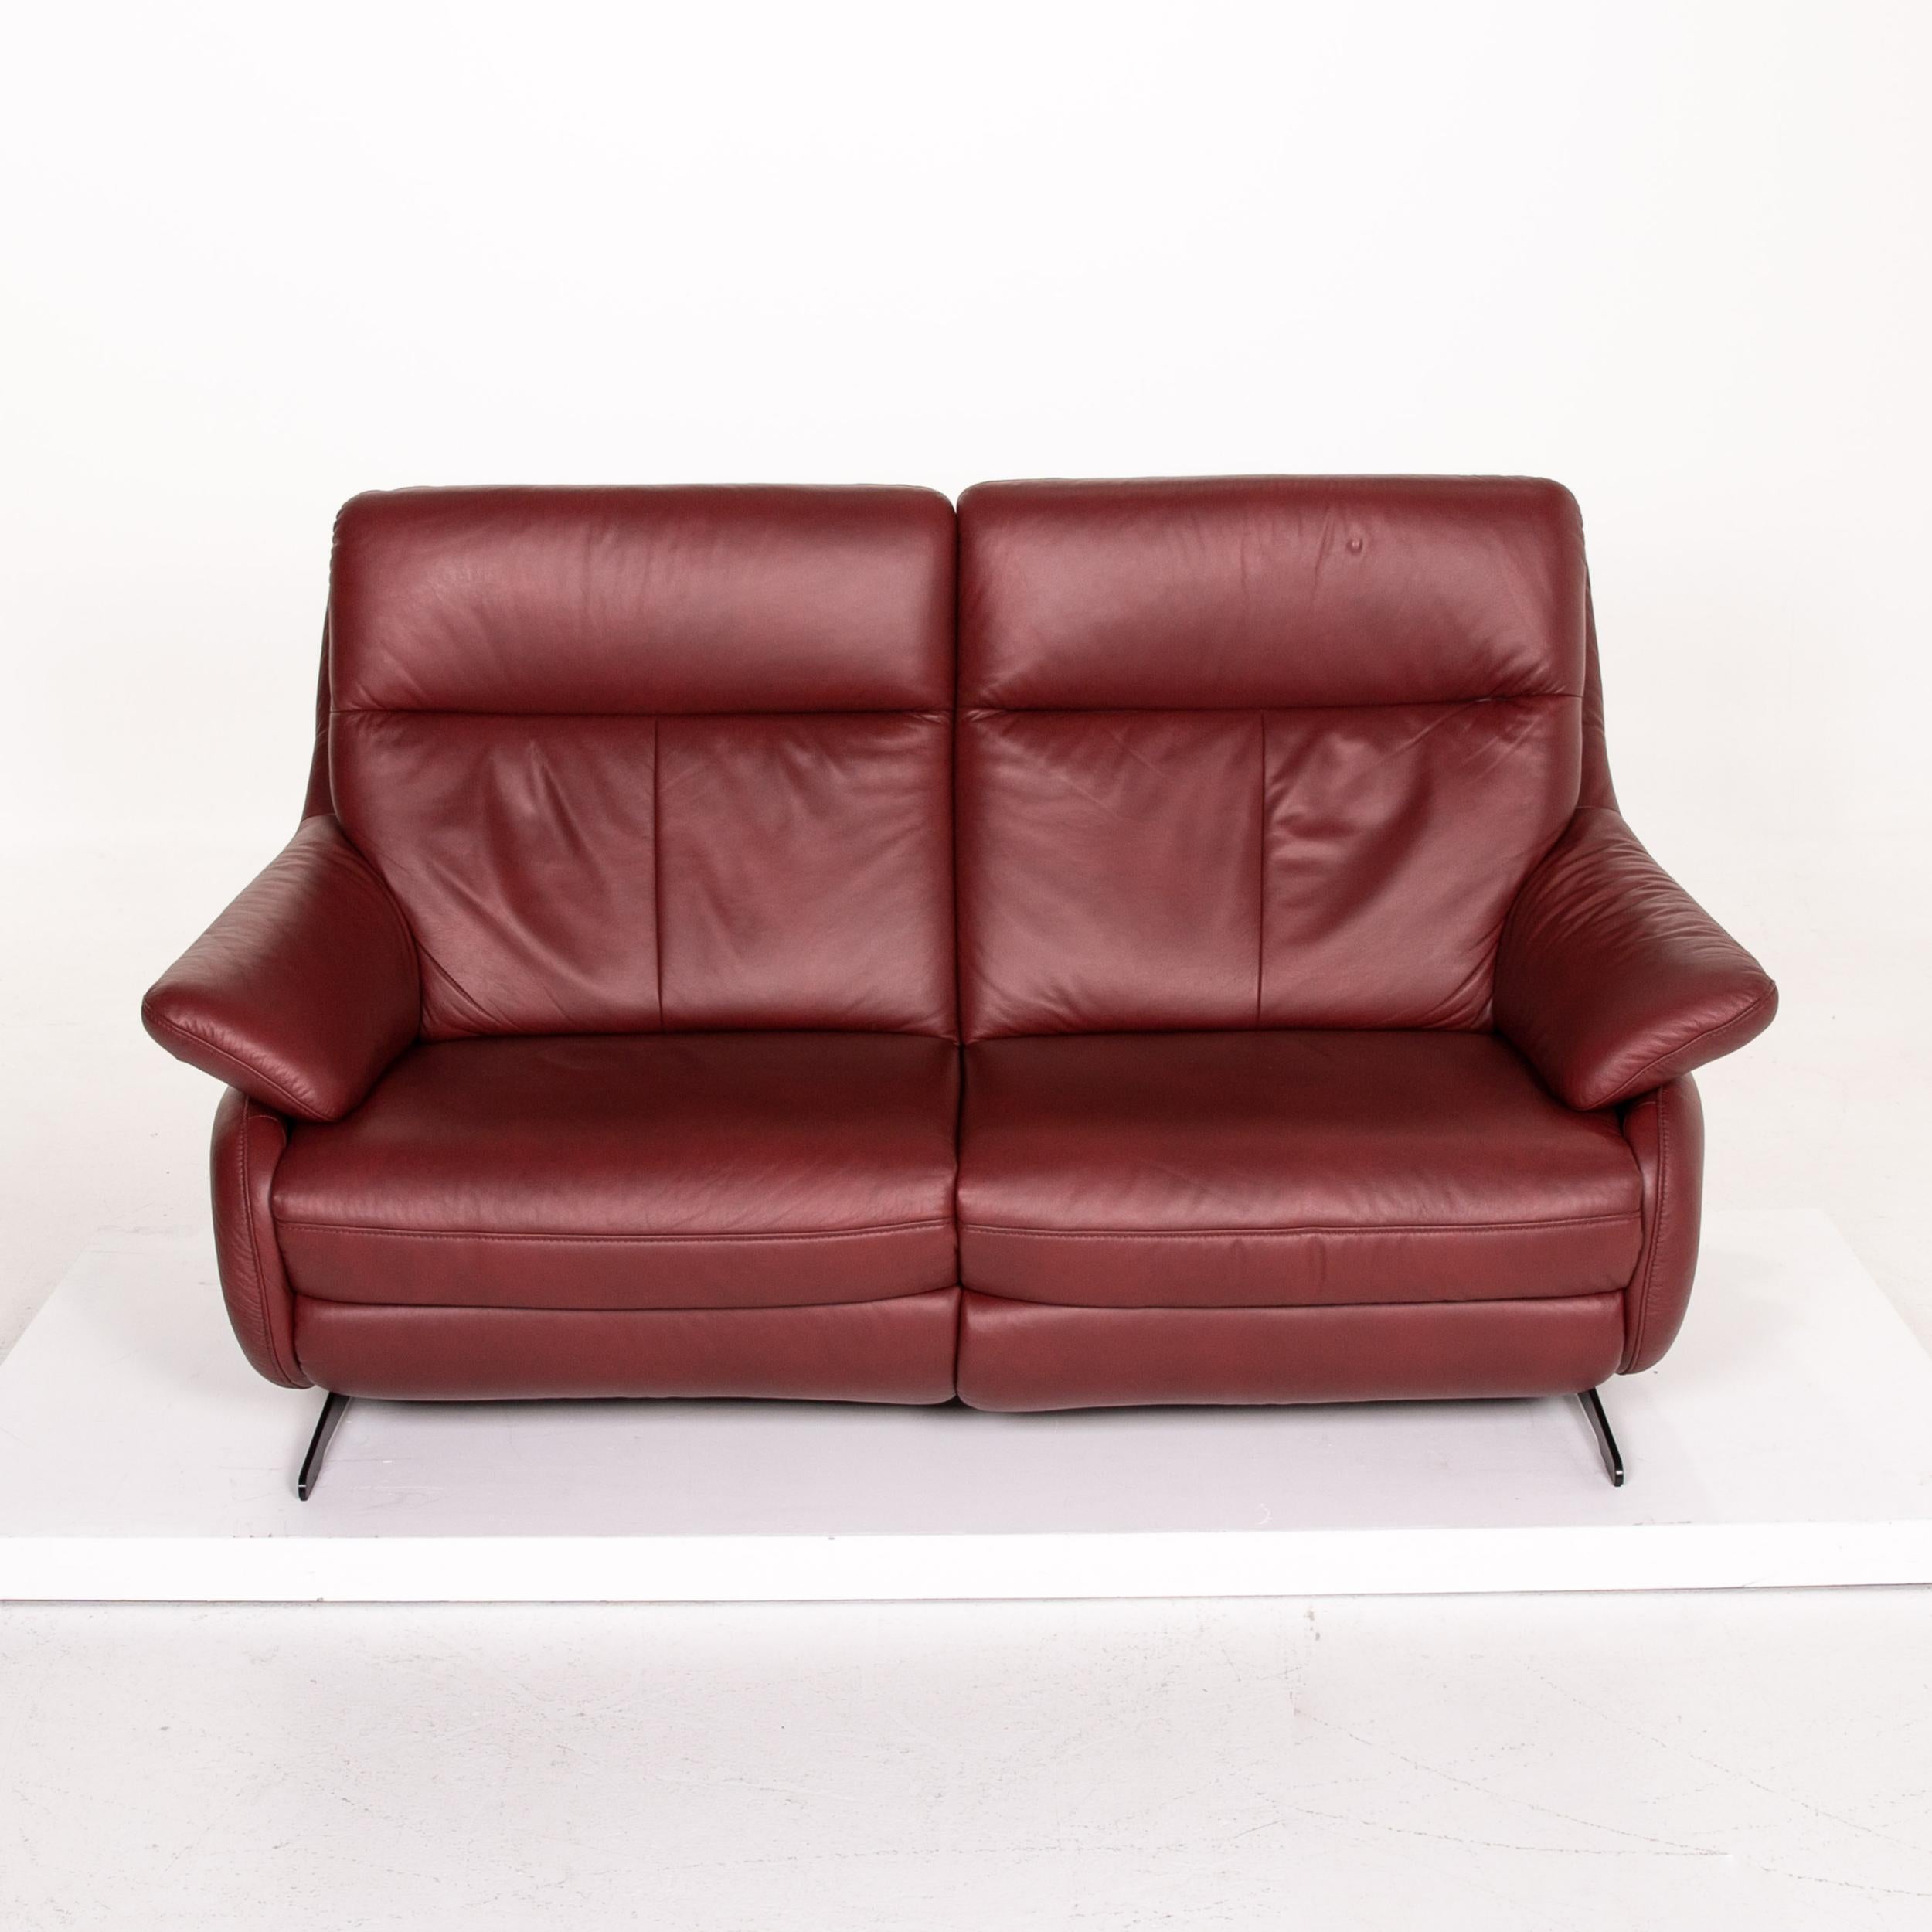 Himolla Leather Sofa Electric Function Red Dark Red Relax Function Couch For Sale 1